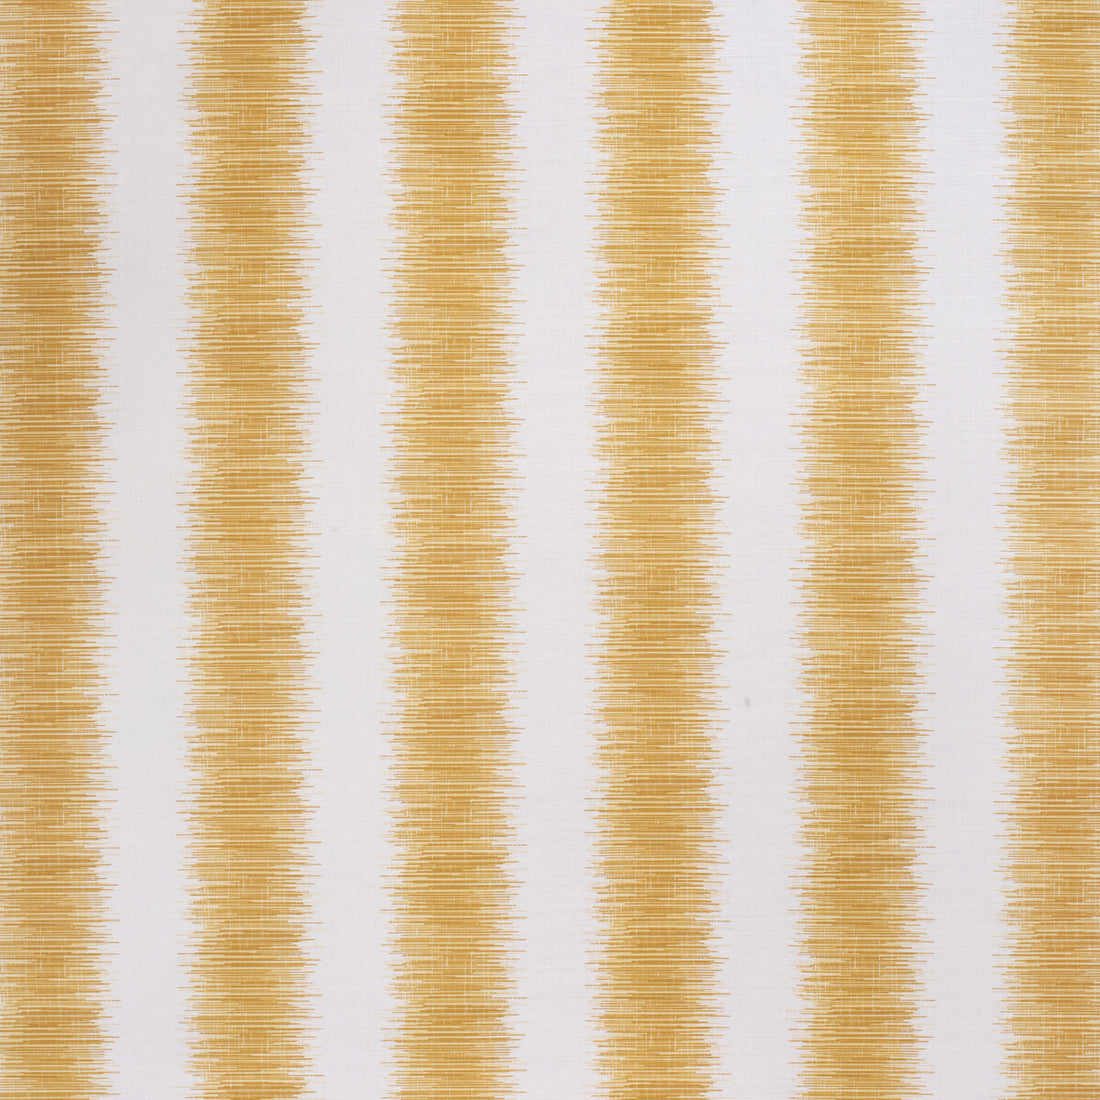 Hampton Stripe fabric in amber/whi color - pattern 2020135.401.0 - by Lee Jofa in the Paolo Moschino Fabrics collection